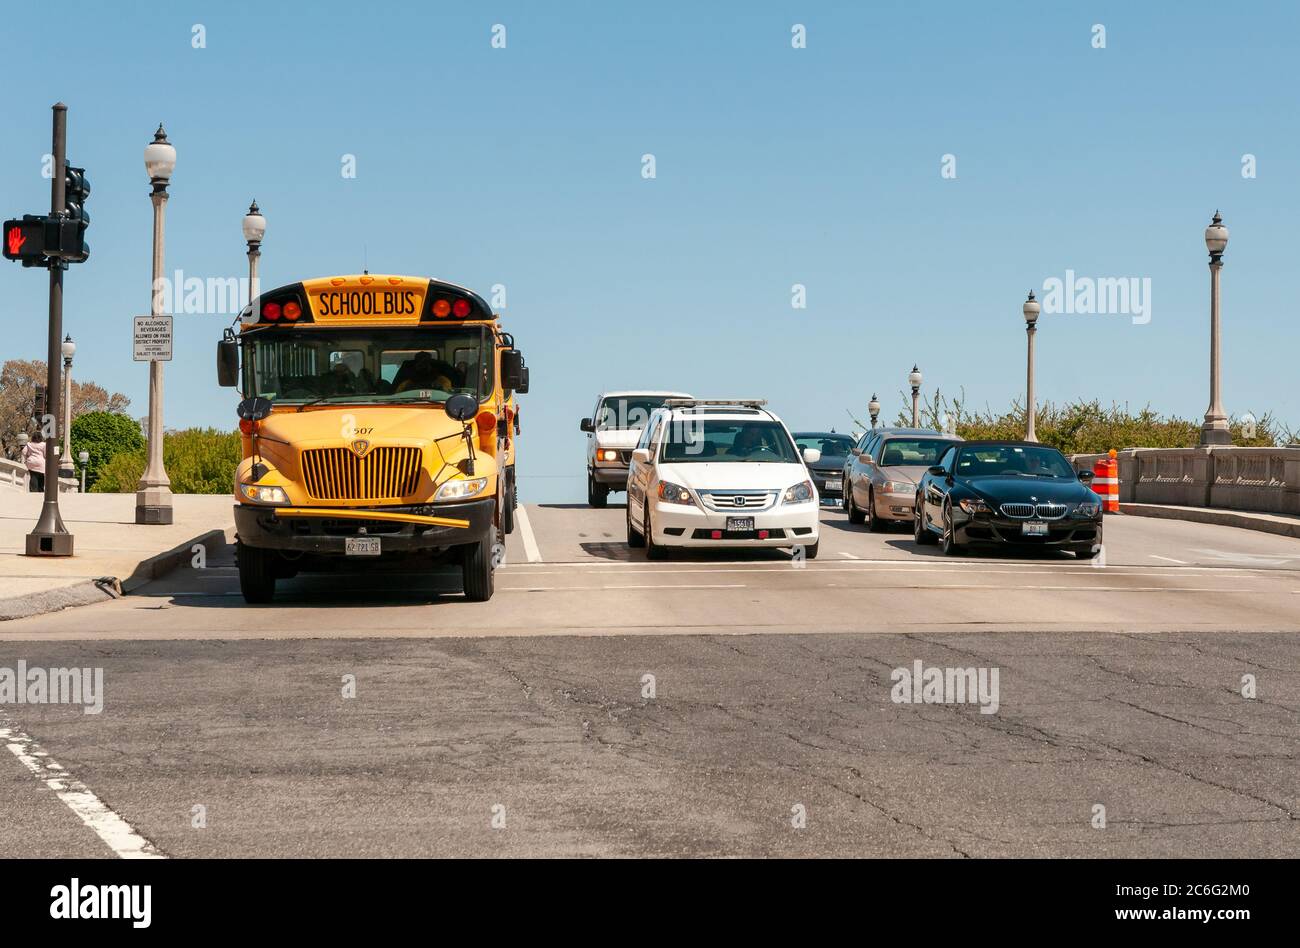 Chicago, Illinois, USA - April 23, 2012: Yellow school bus and cars stopped at the red light on the road in Chicago Downtown, Illinois, USA Stock Photo